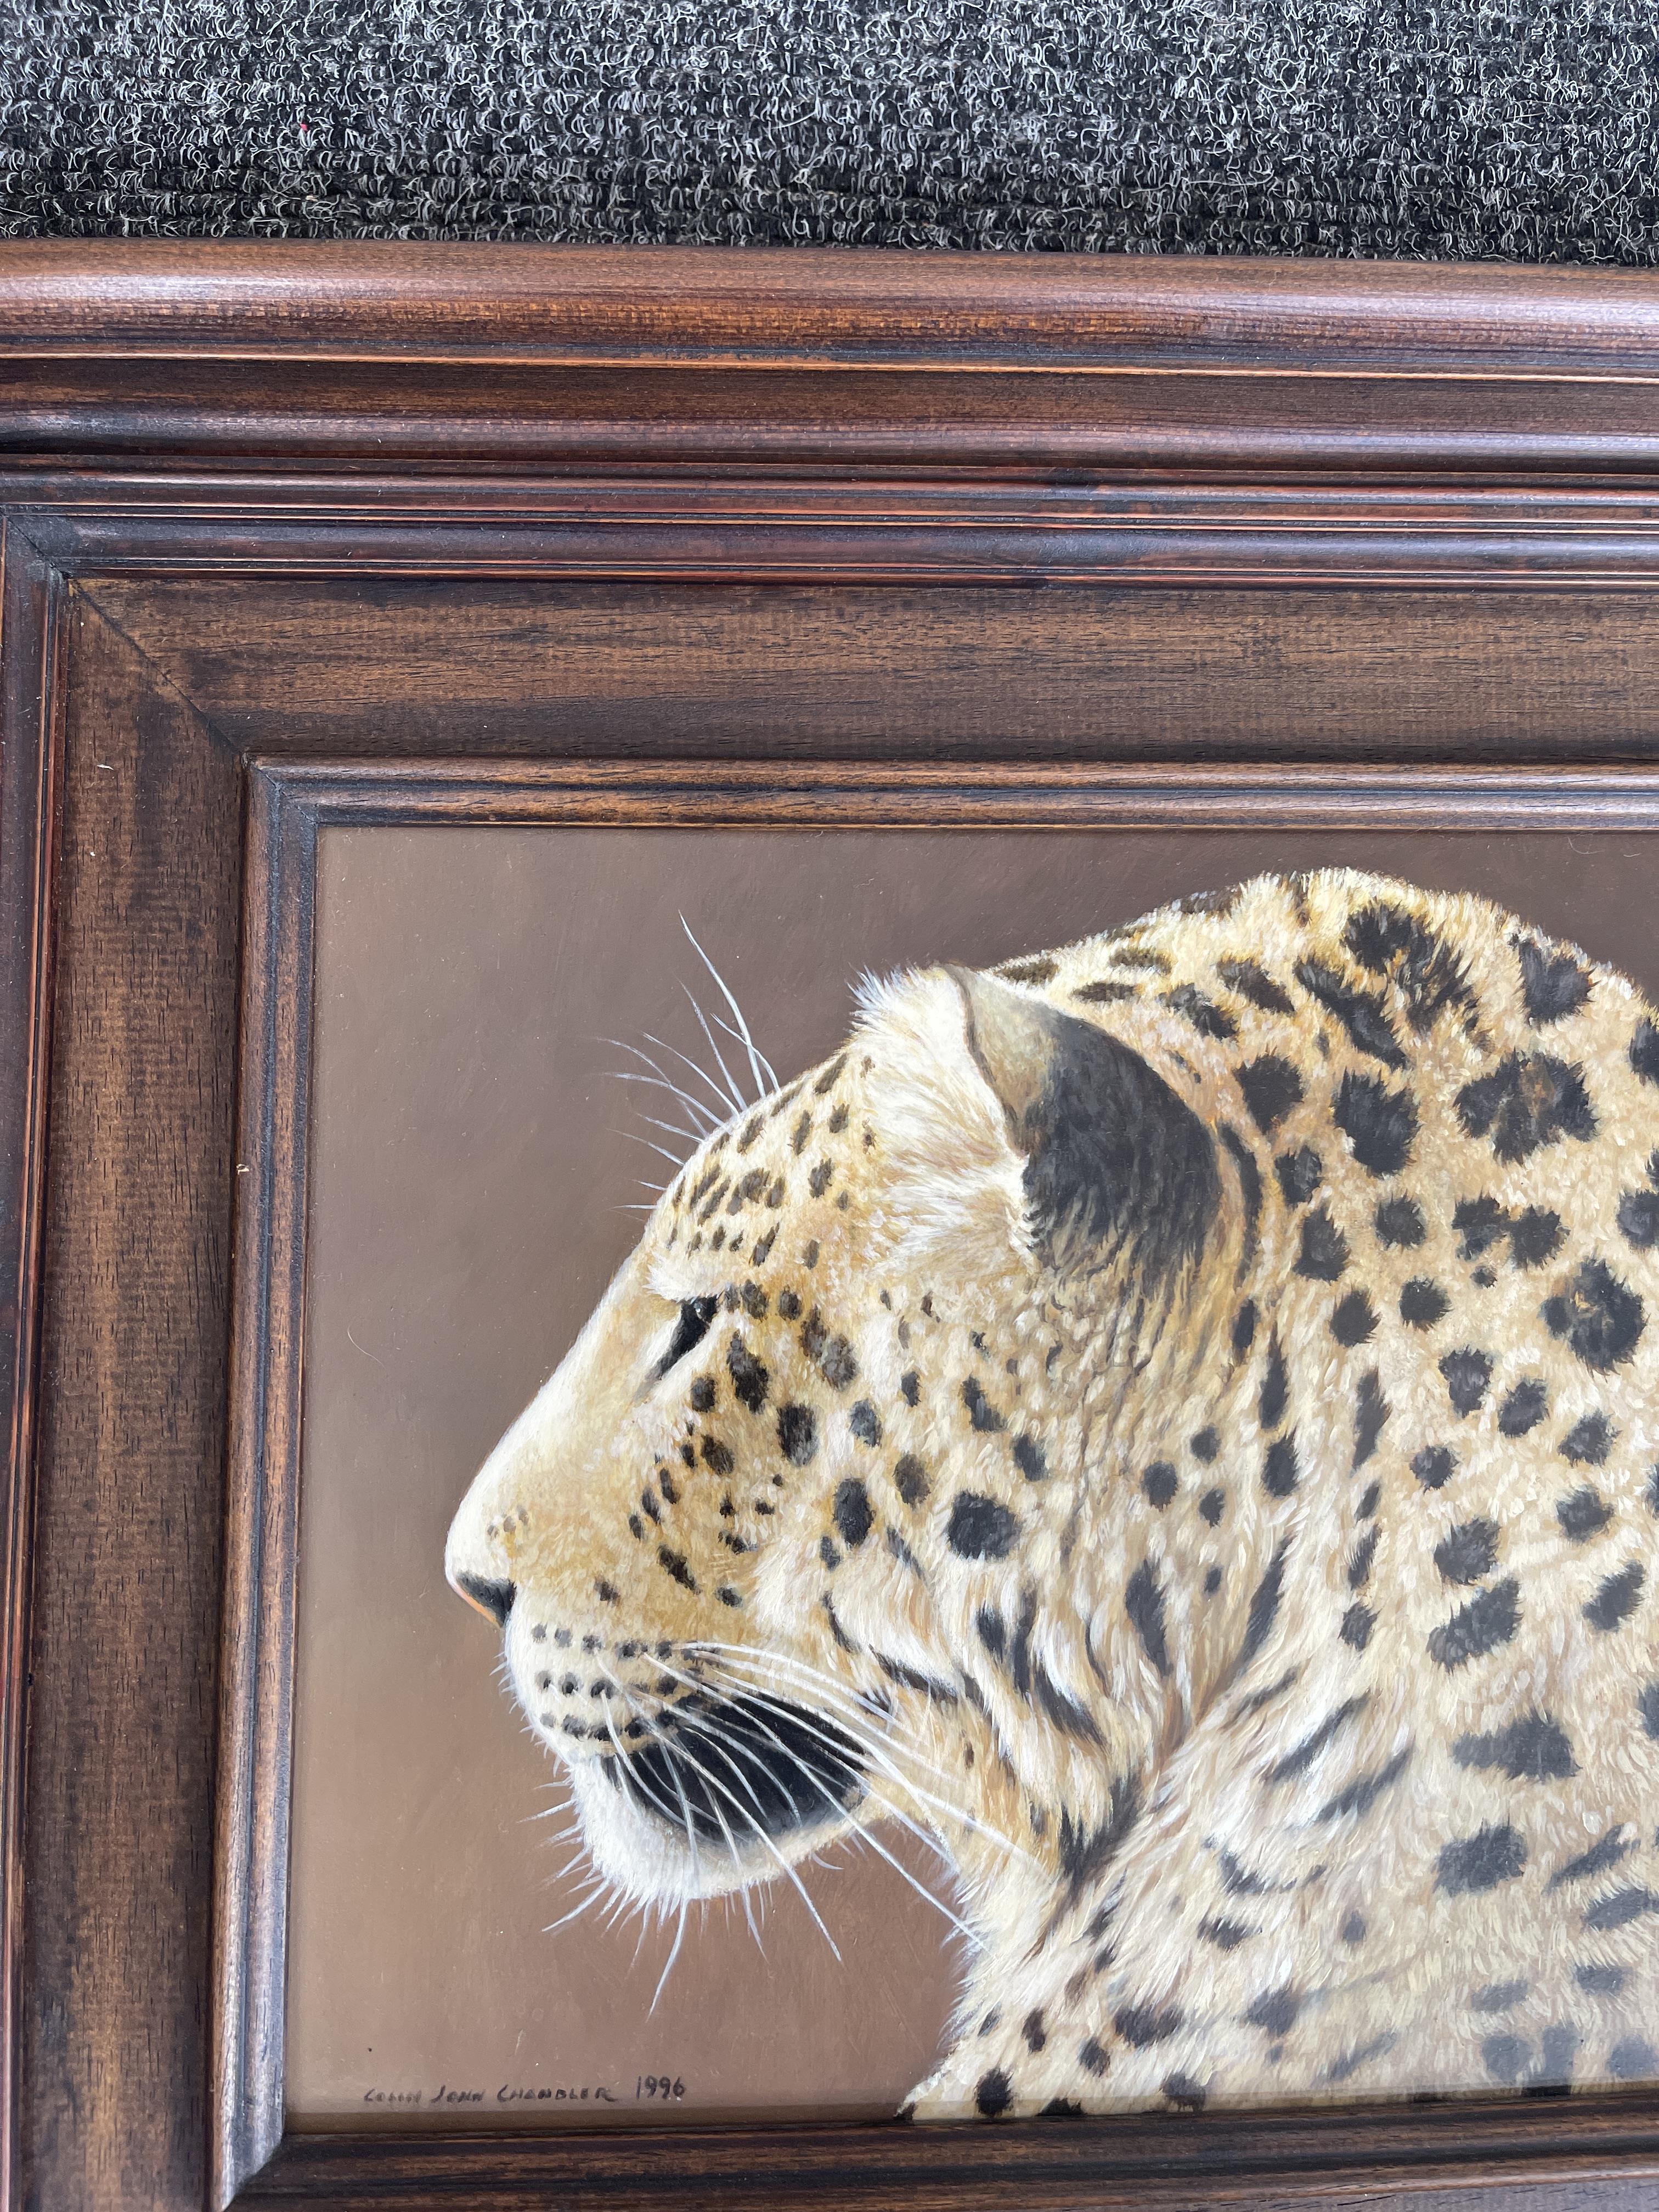 Signed and Framed Oil On Panel - Leopard - by Coli - Image 7 of 22